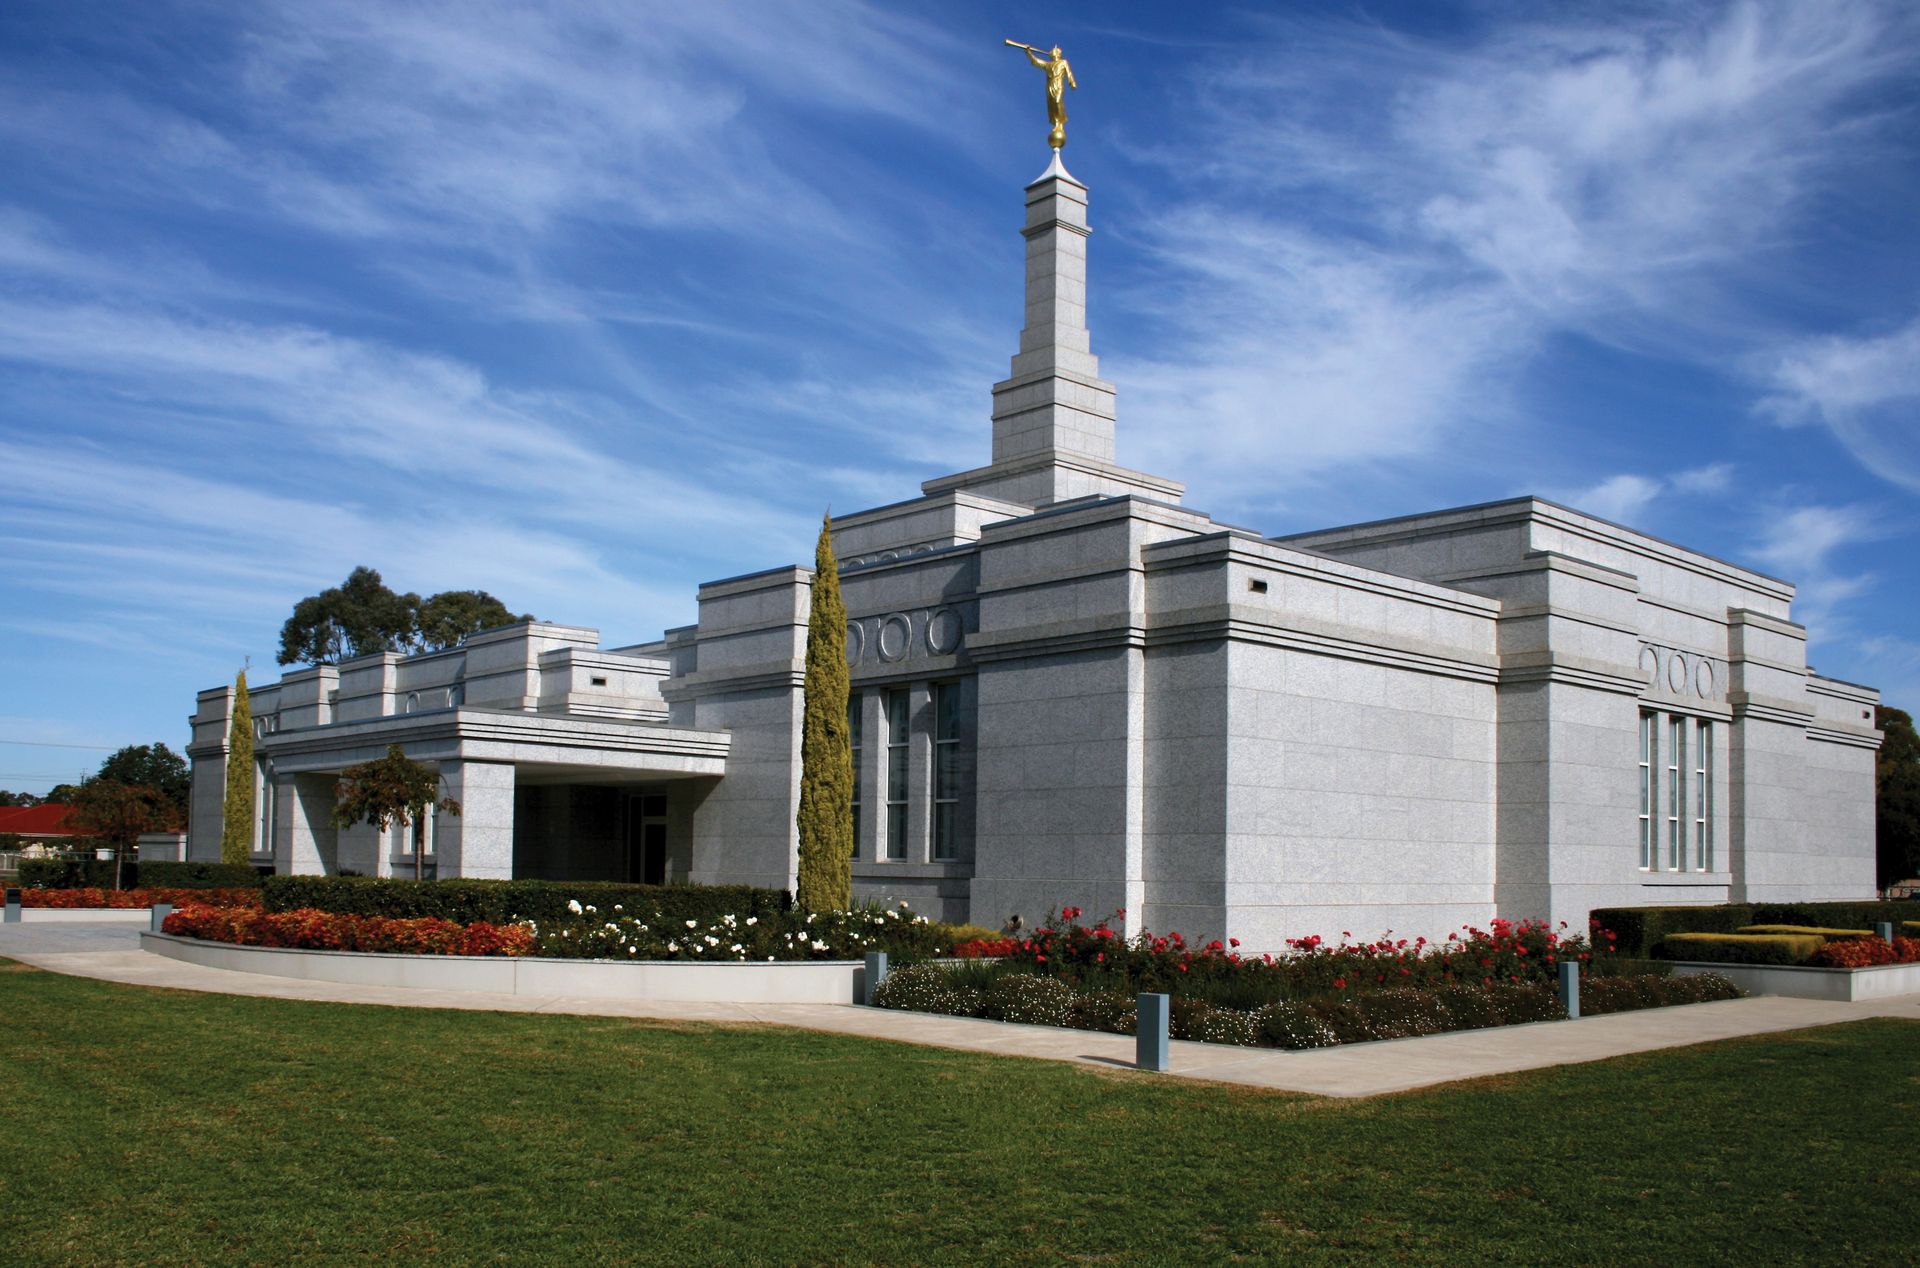 An exterior view of the Adelaide Australia Temple and grounds.